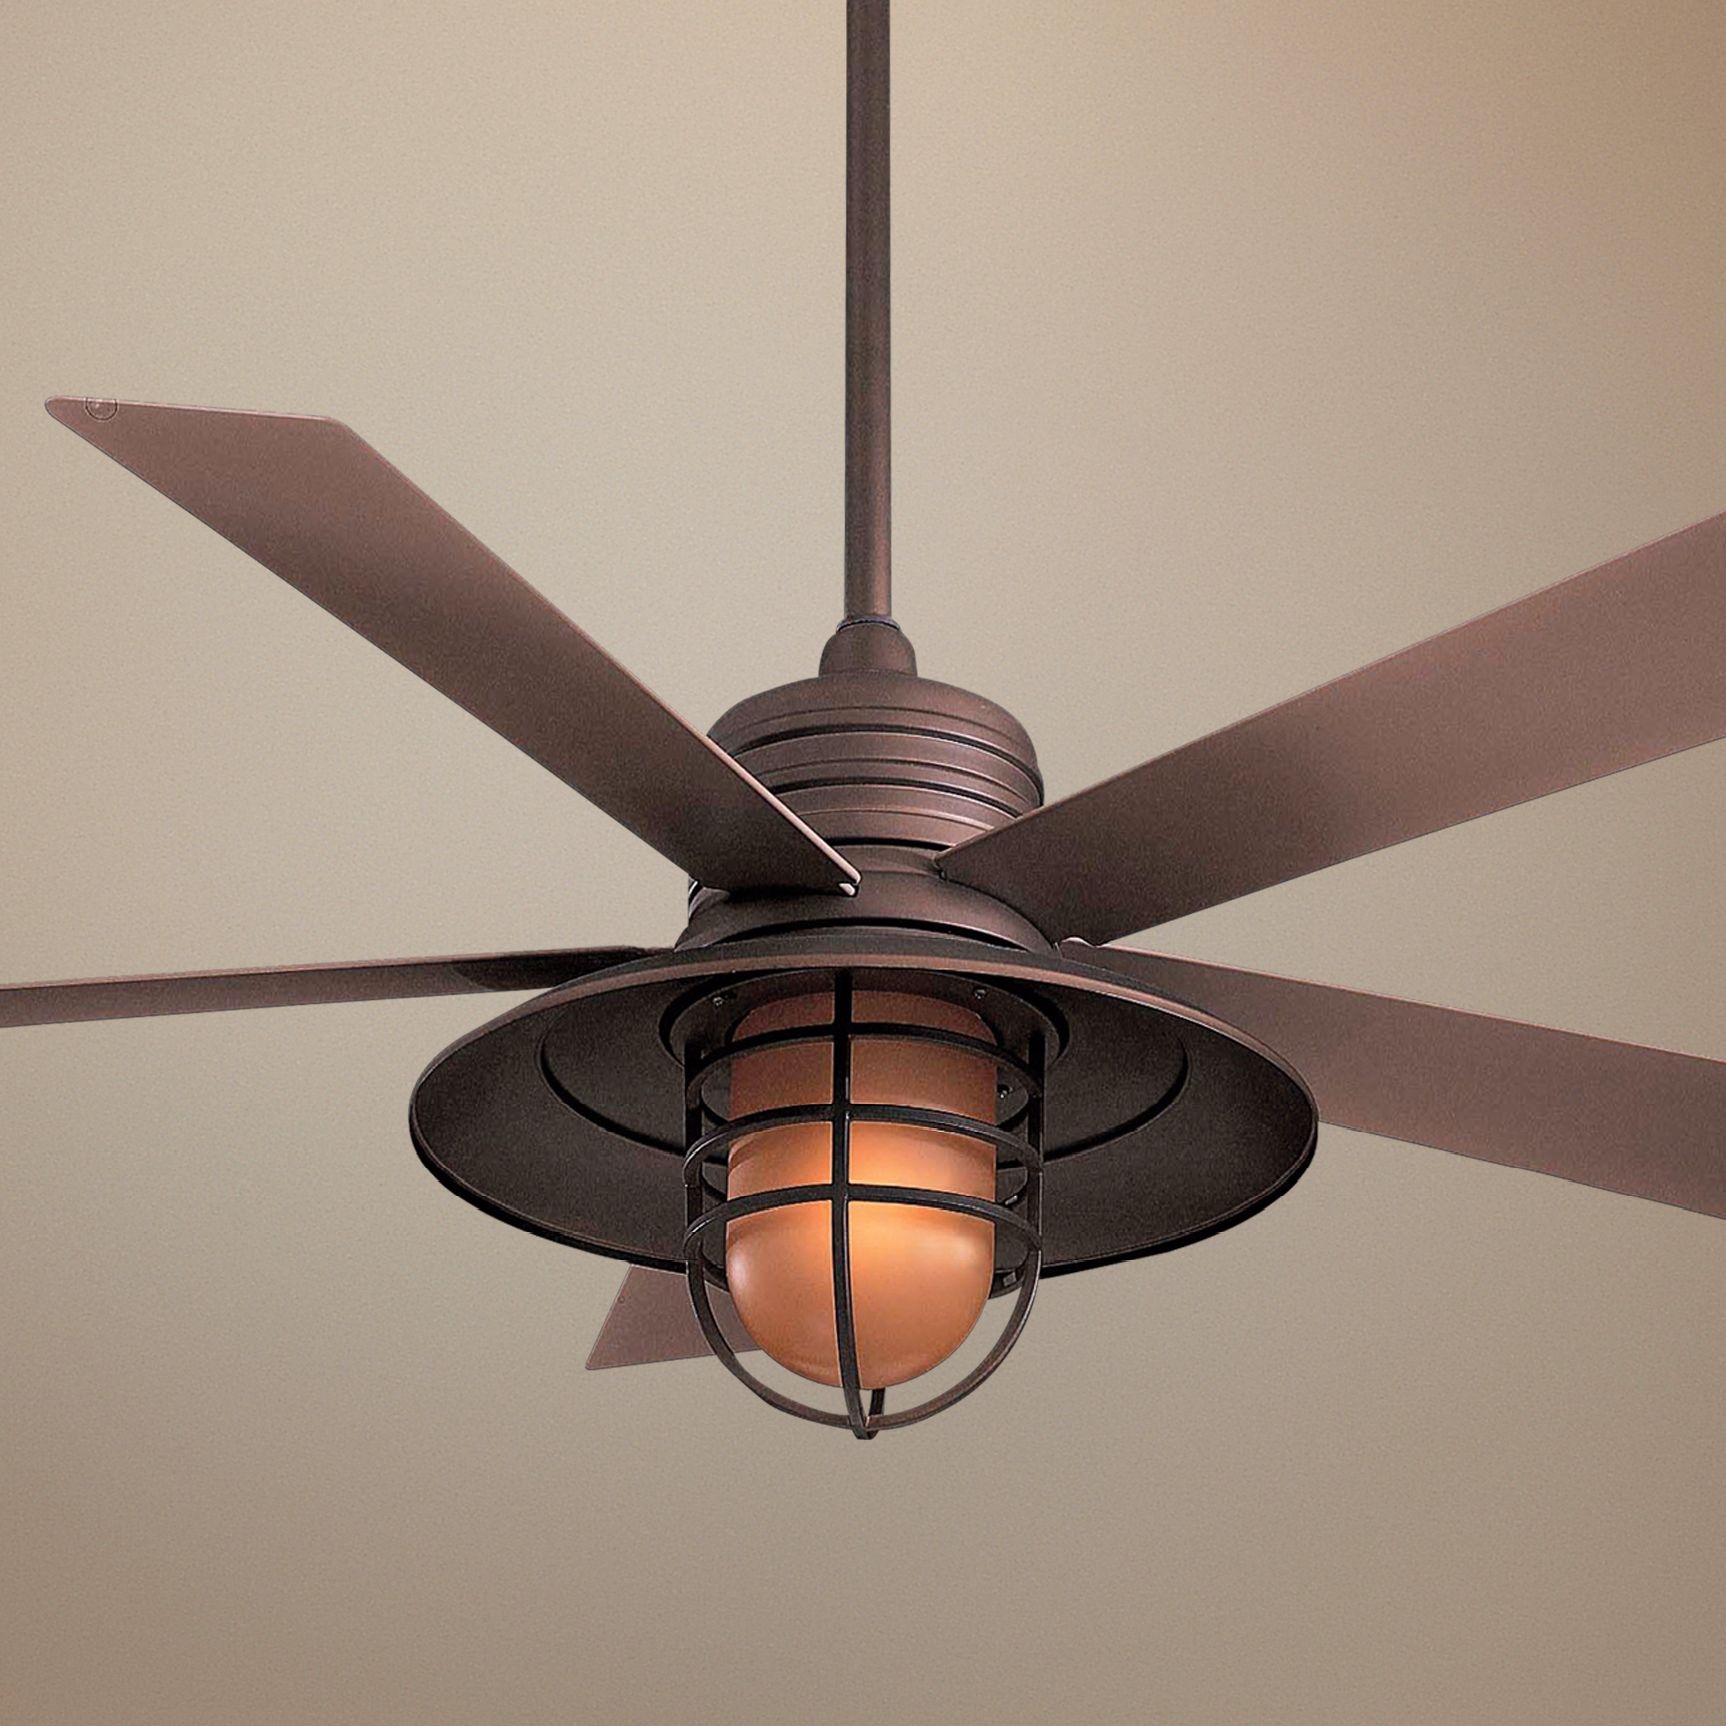 Permalink to Antique Looking Ceiling Fans With Lights